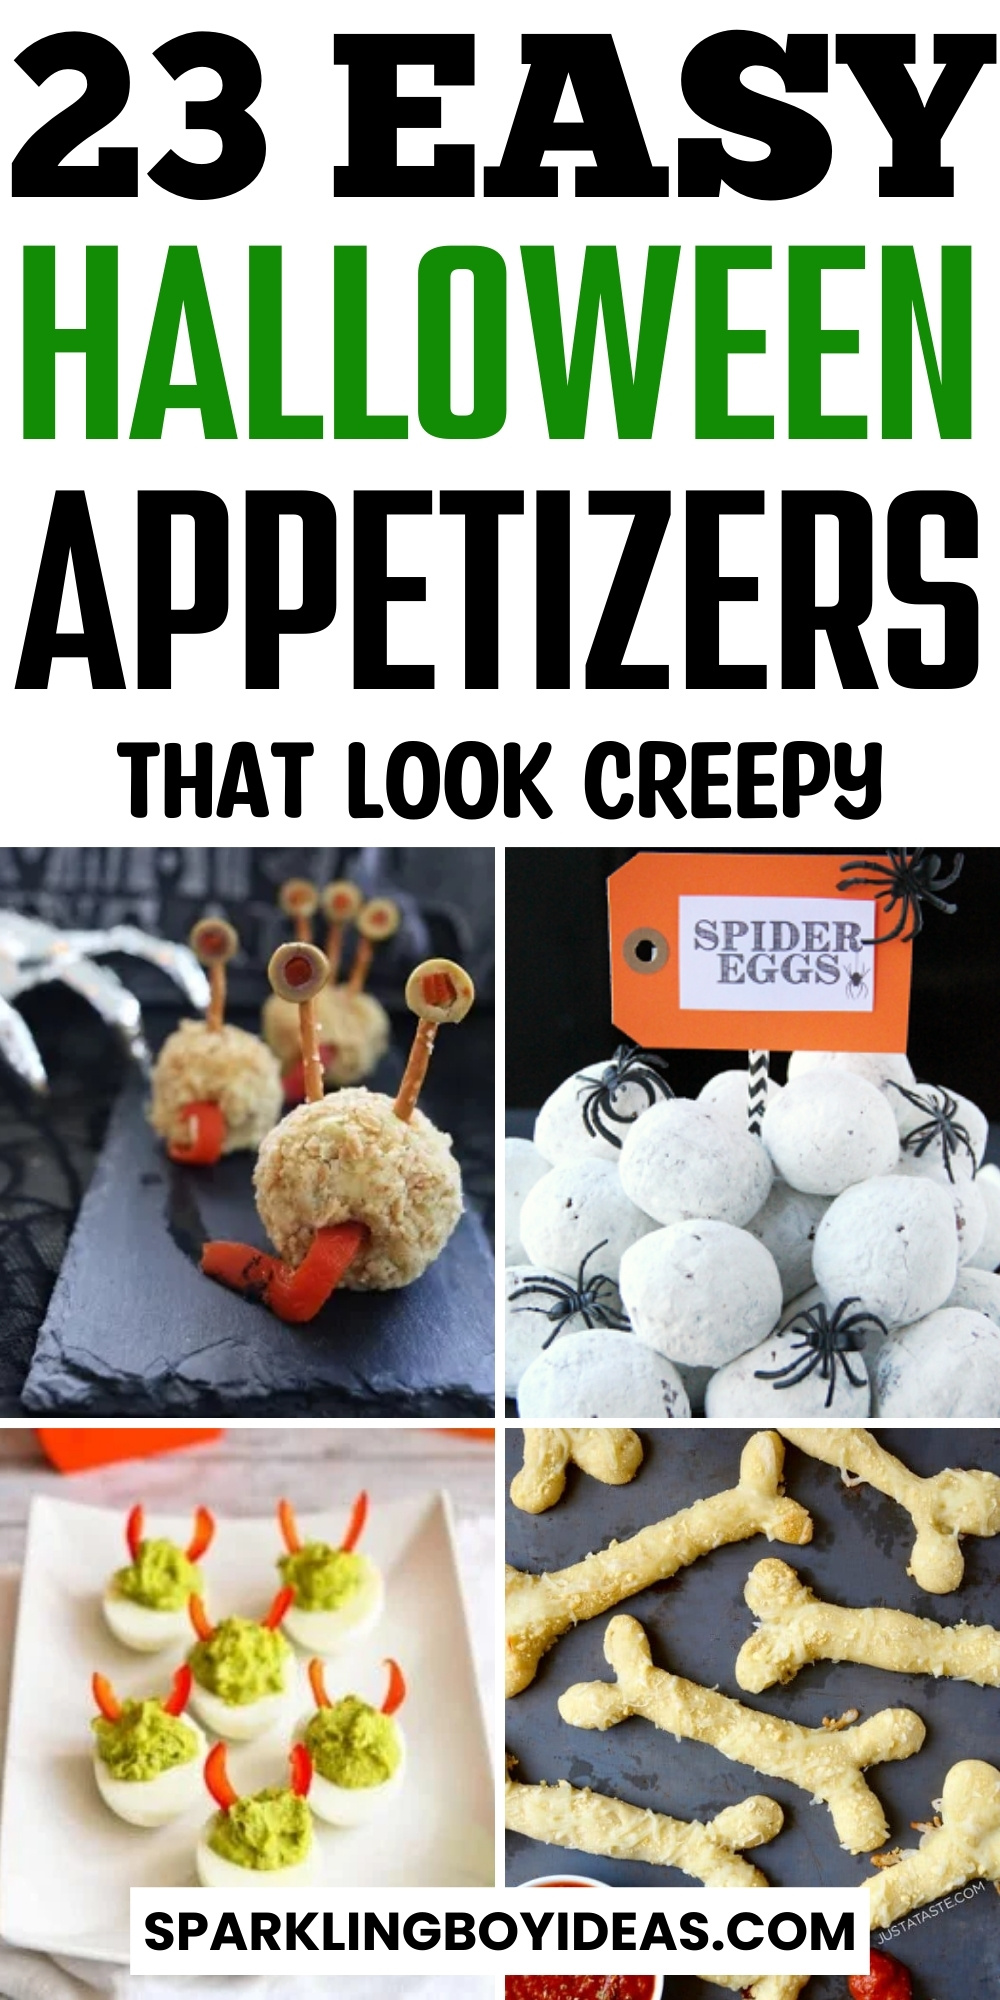 26 Spine Chilling Halloween Appetizers - Sparkling Boy Ideas